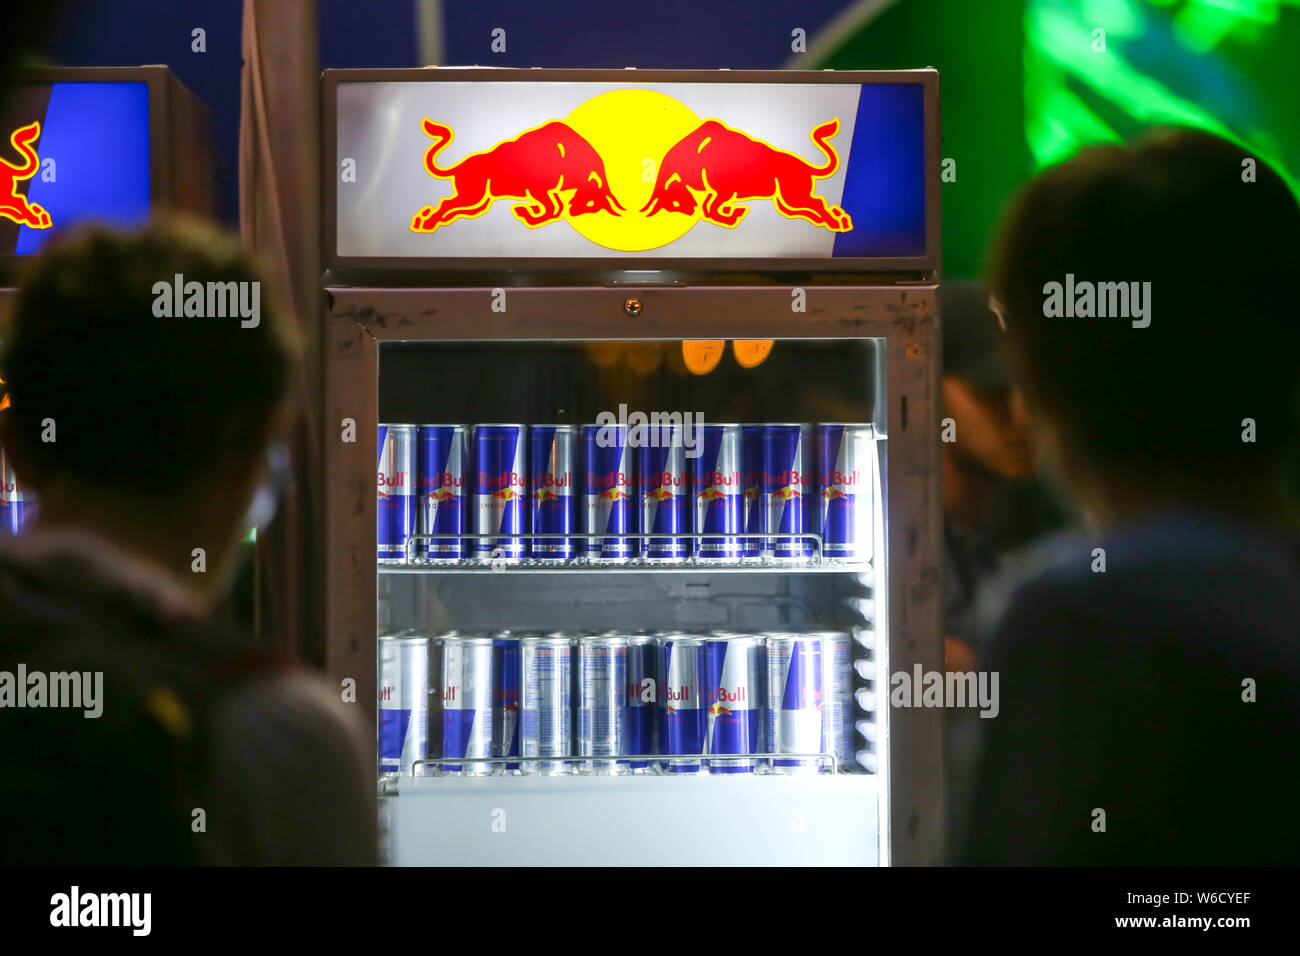 https://c8.alamy.com/comp/W6CYEF/brezje-croatia-19th-july-2019-people-on-the-red-bull-bar-with-fridge-full-of-red-bull-energy-drink-on-the-forestland-ultimate-forest-electronic-W6CYEF.jpg